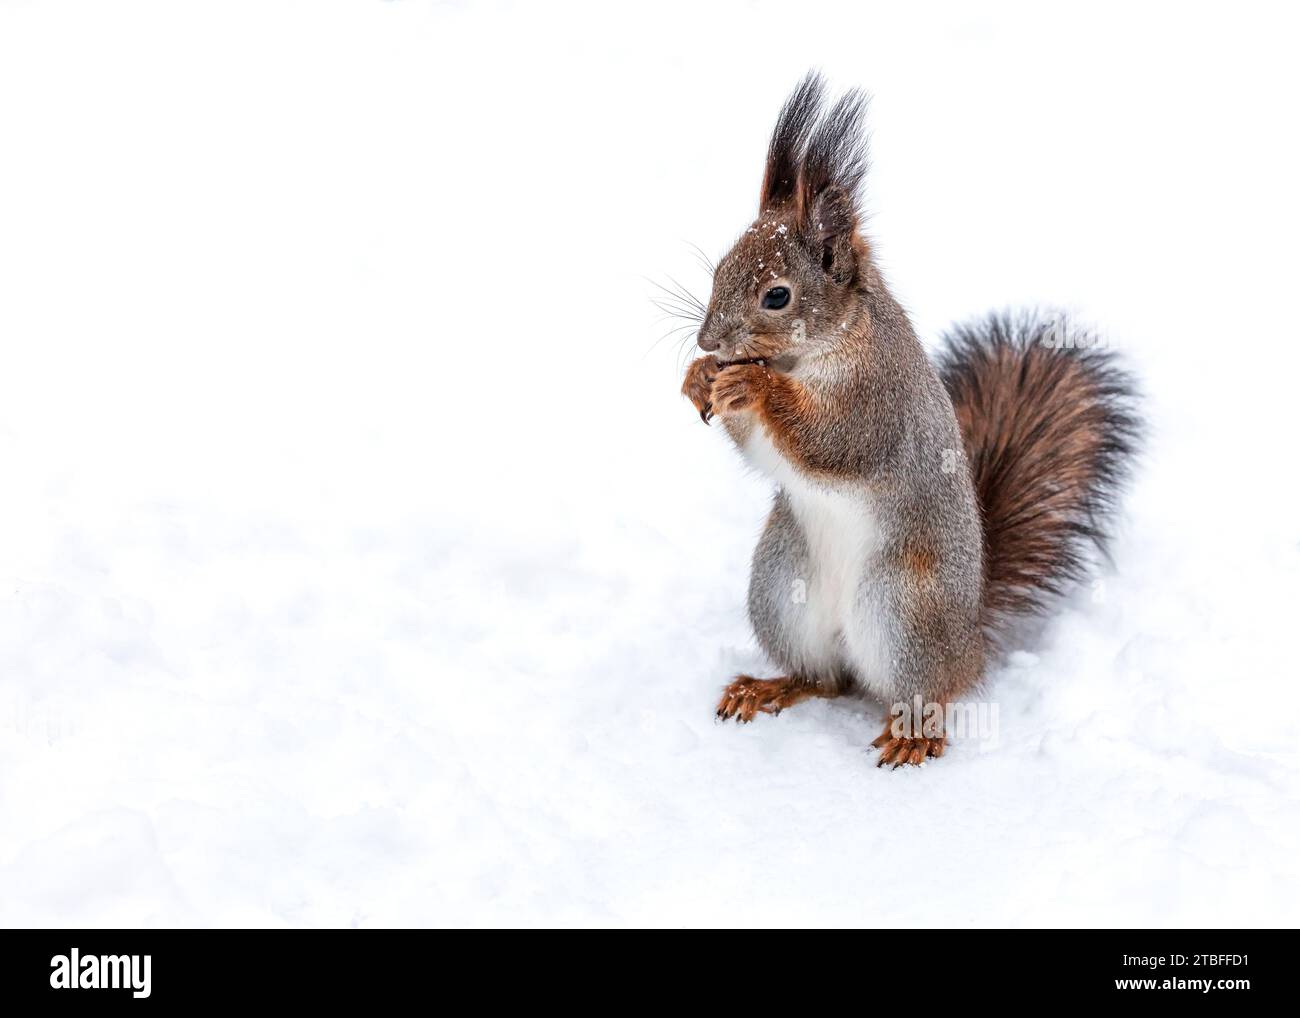 hungry red squirrel standing on the snow and eating a hazelnut. Stock Photo